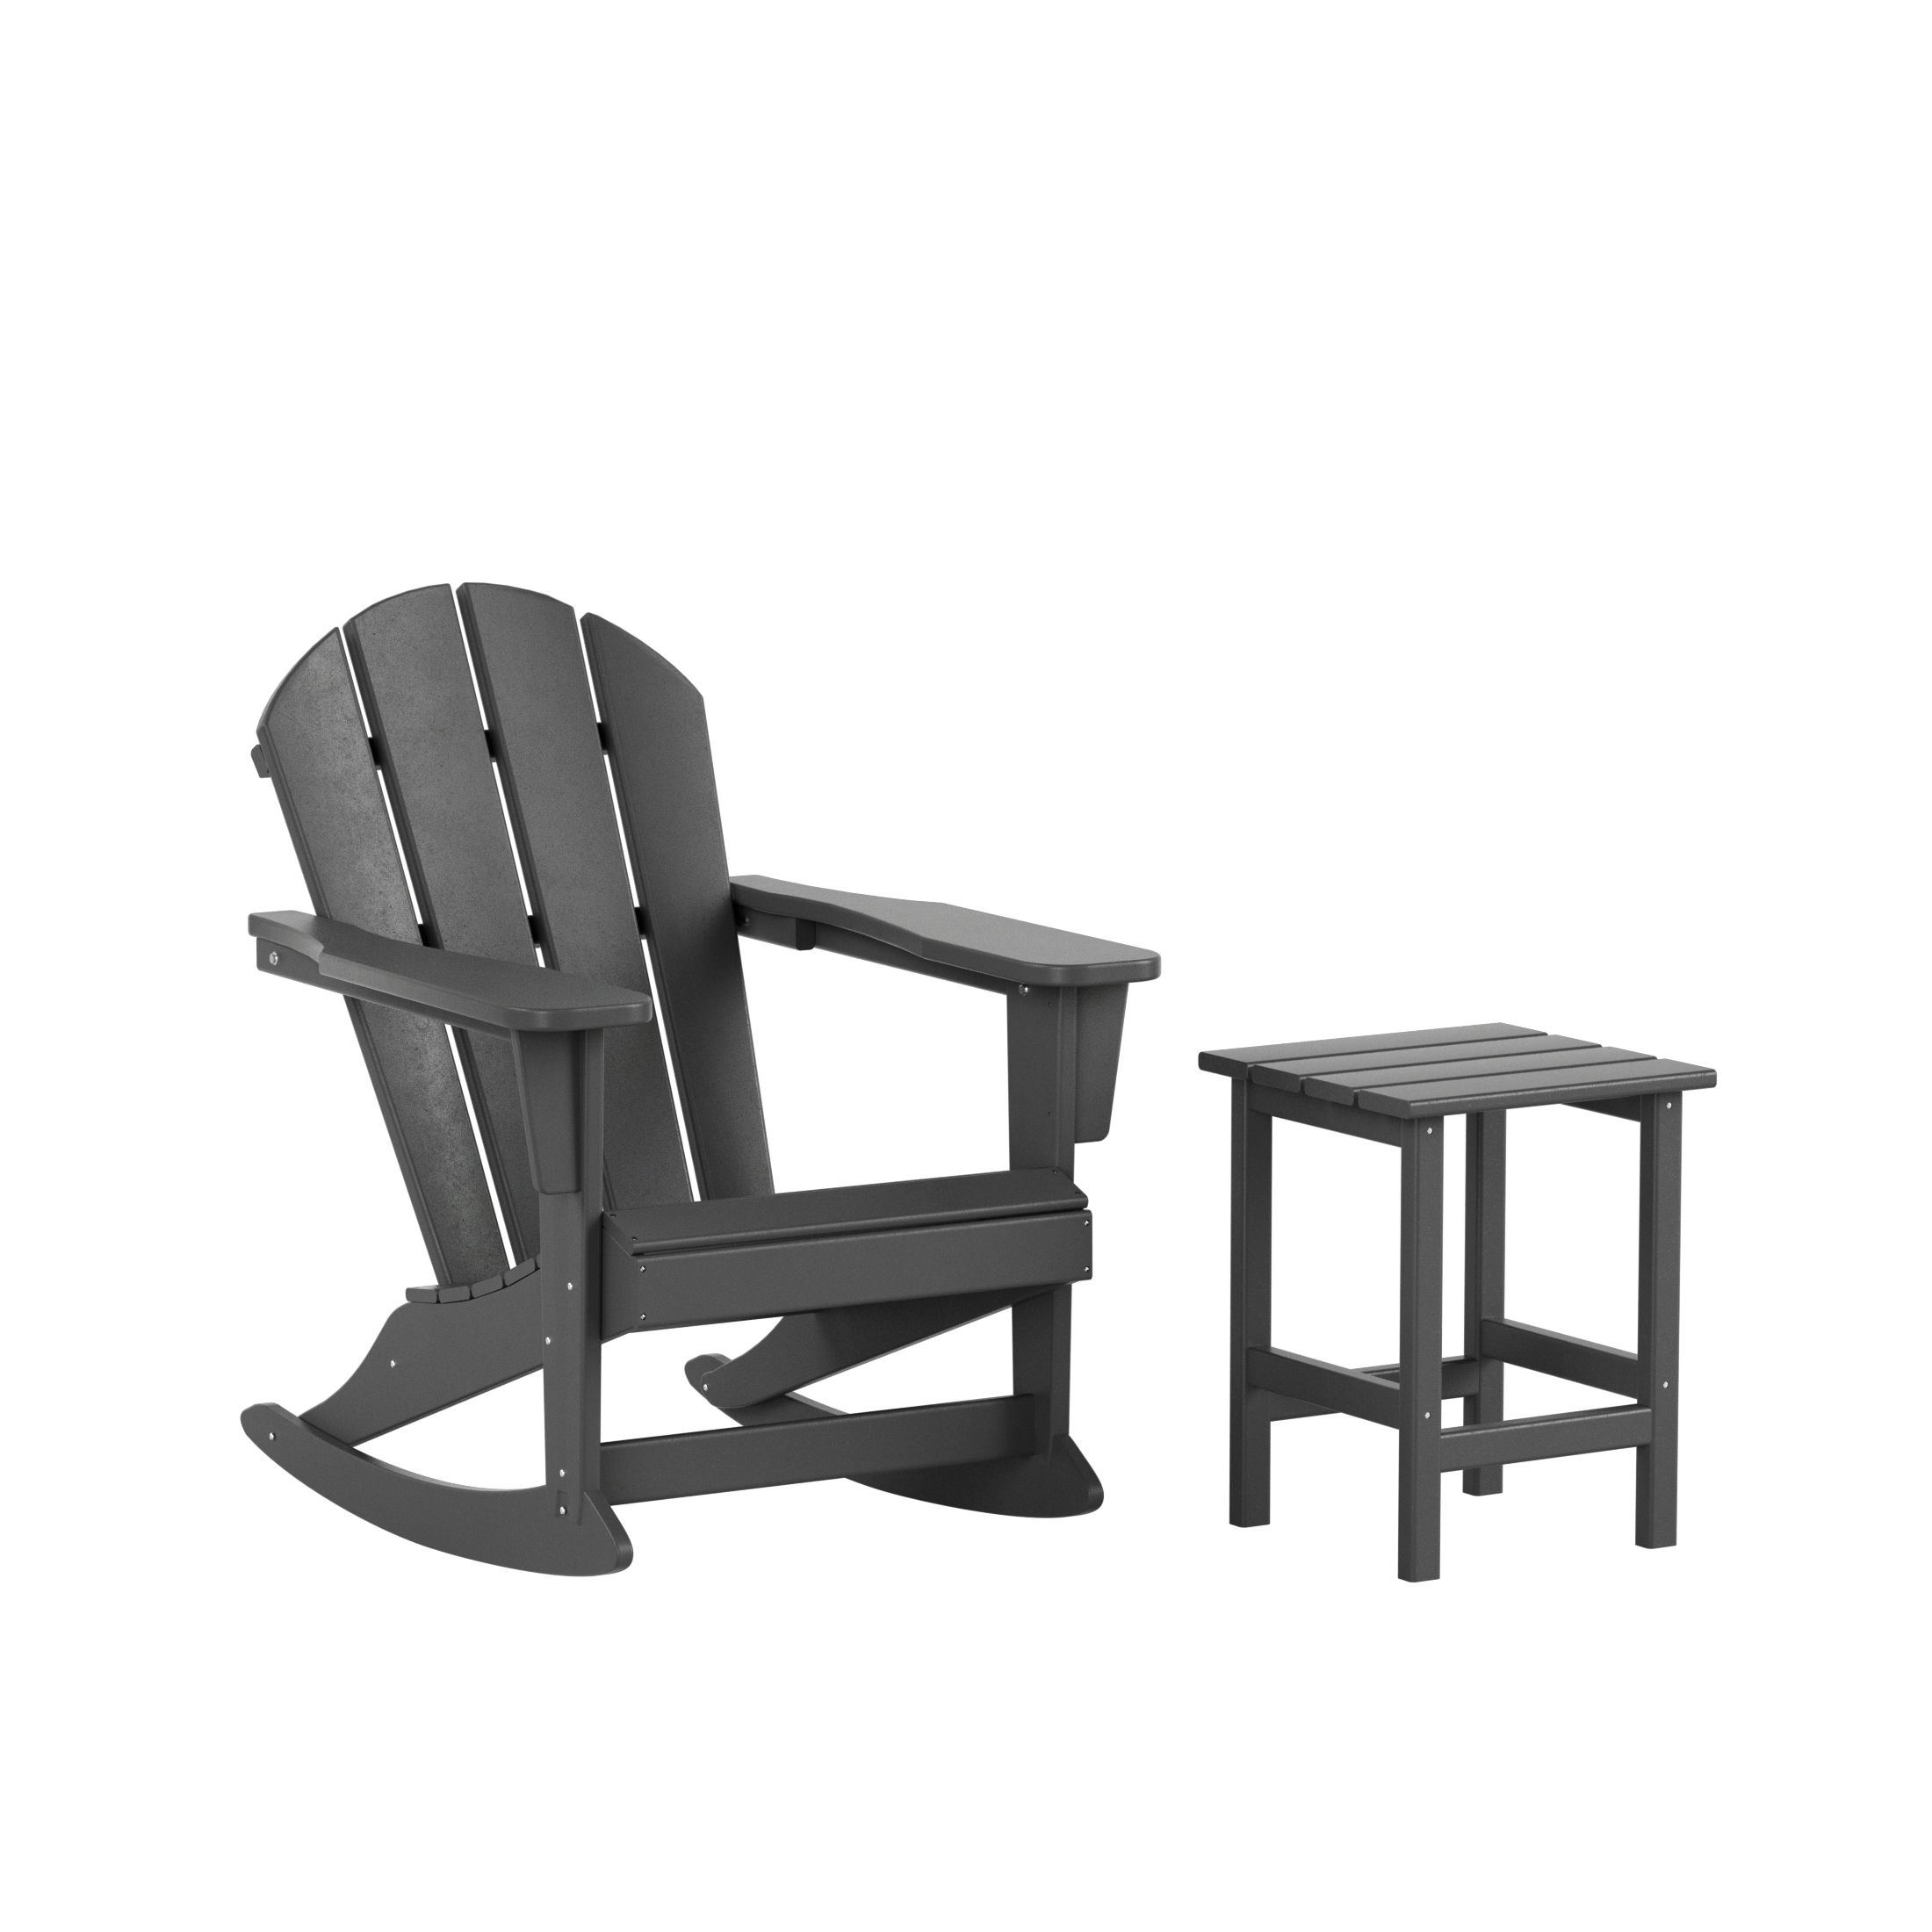 GARDEN 2-Piece Set Plastic Outdoor Rocking Chair with Square Side Table Included, Gray - image 2 of 11